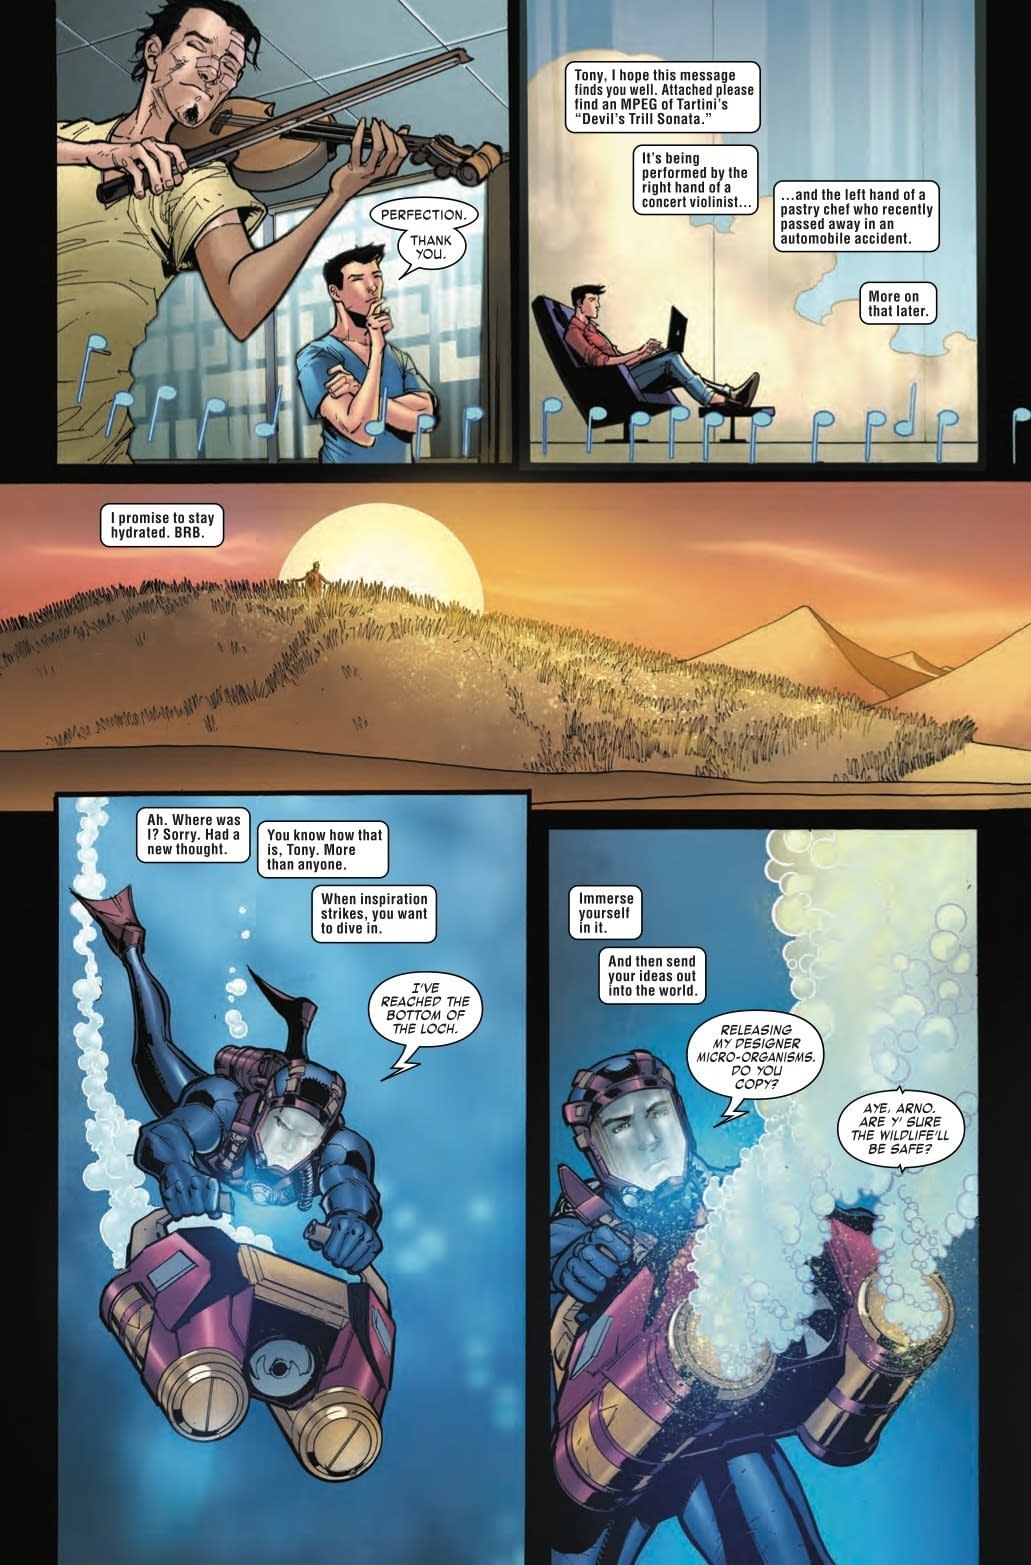 Arno Stark with a Cure for Loneliness? A Tony Stark Iron Man #5 Preview